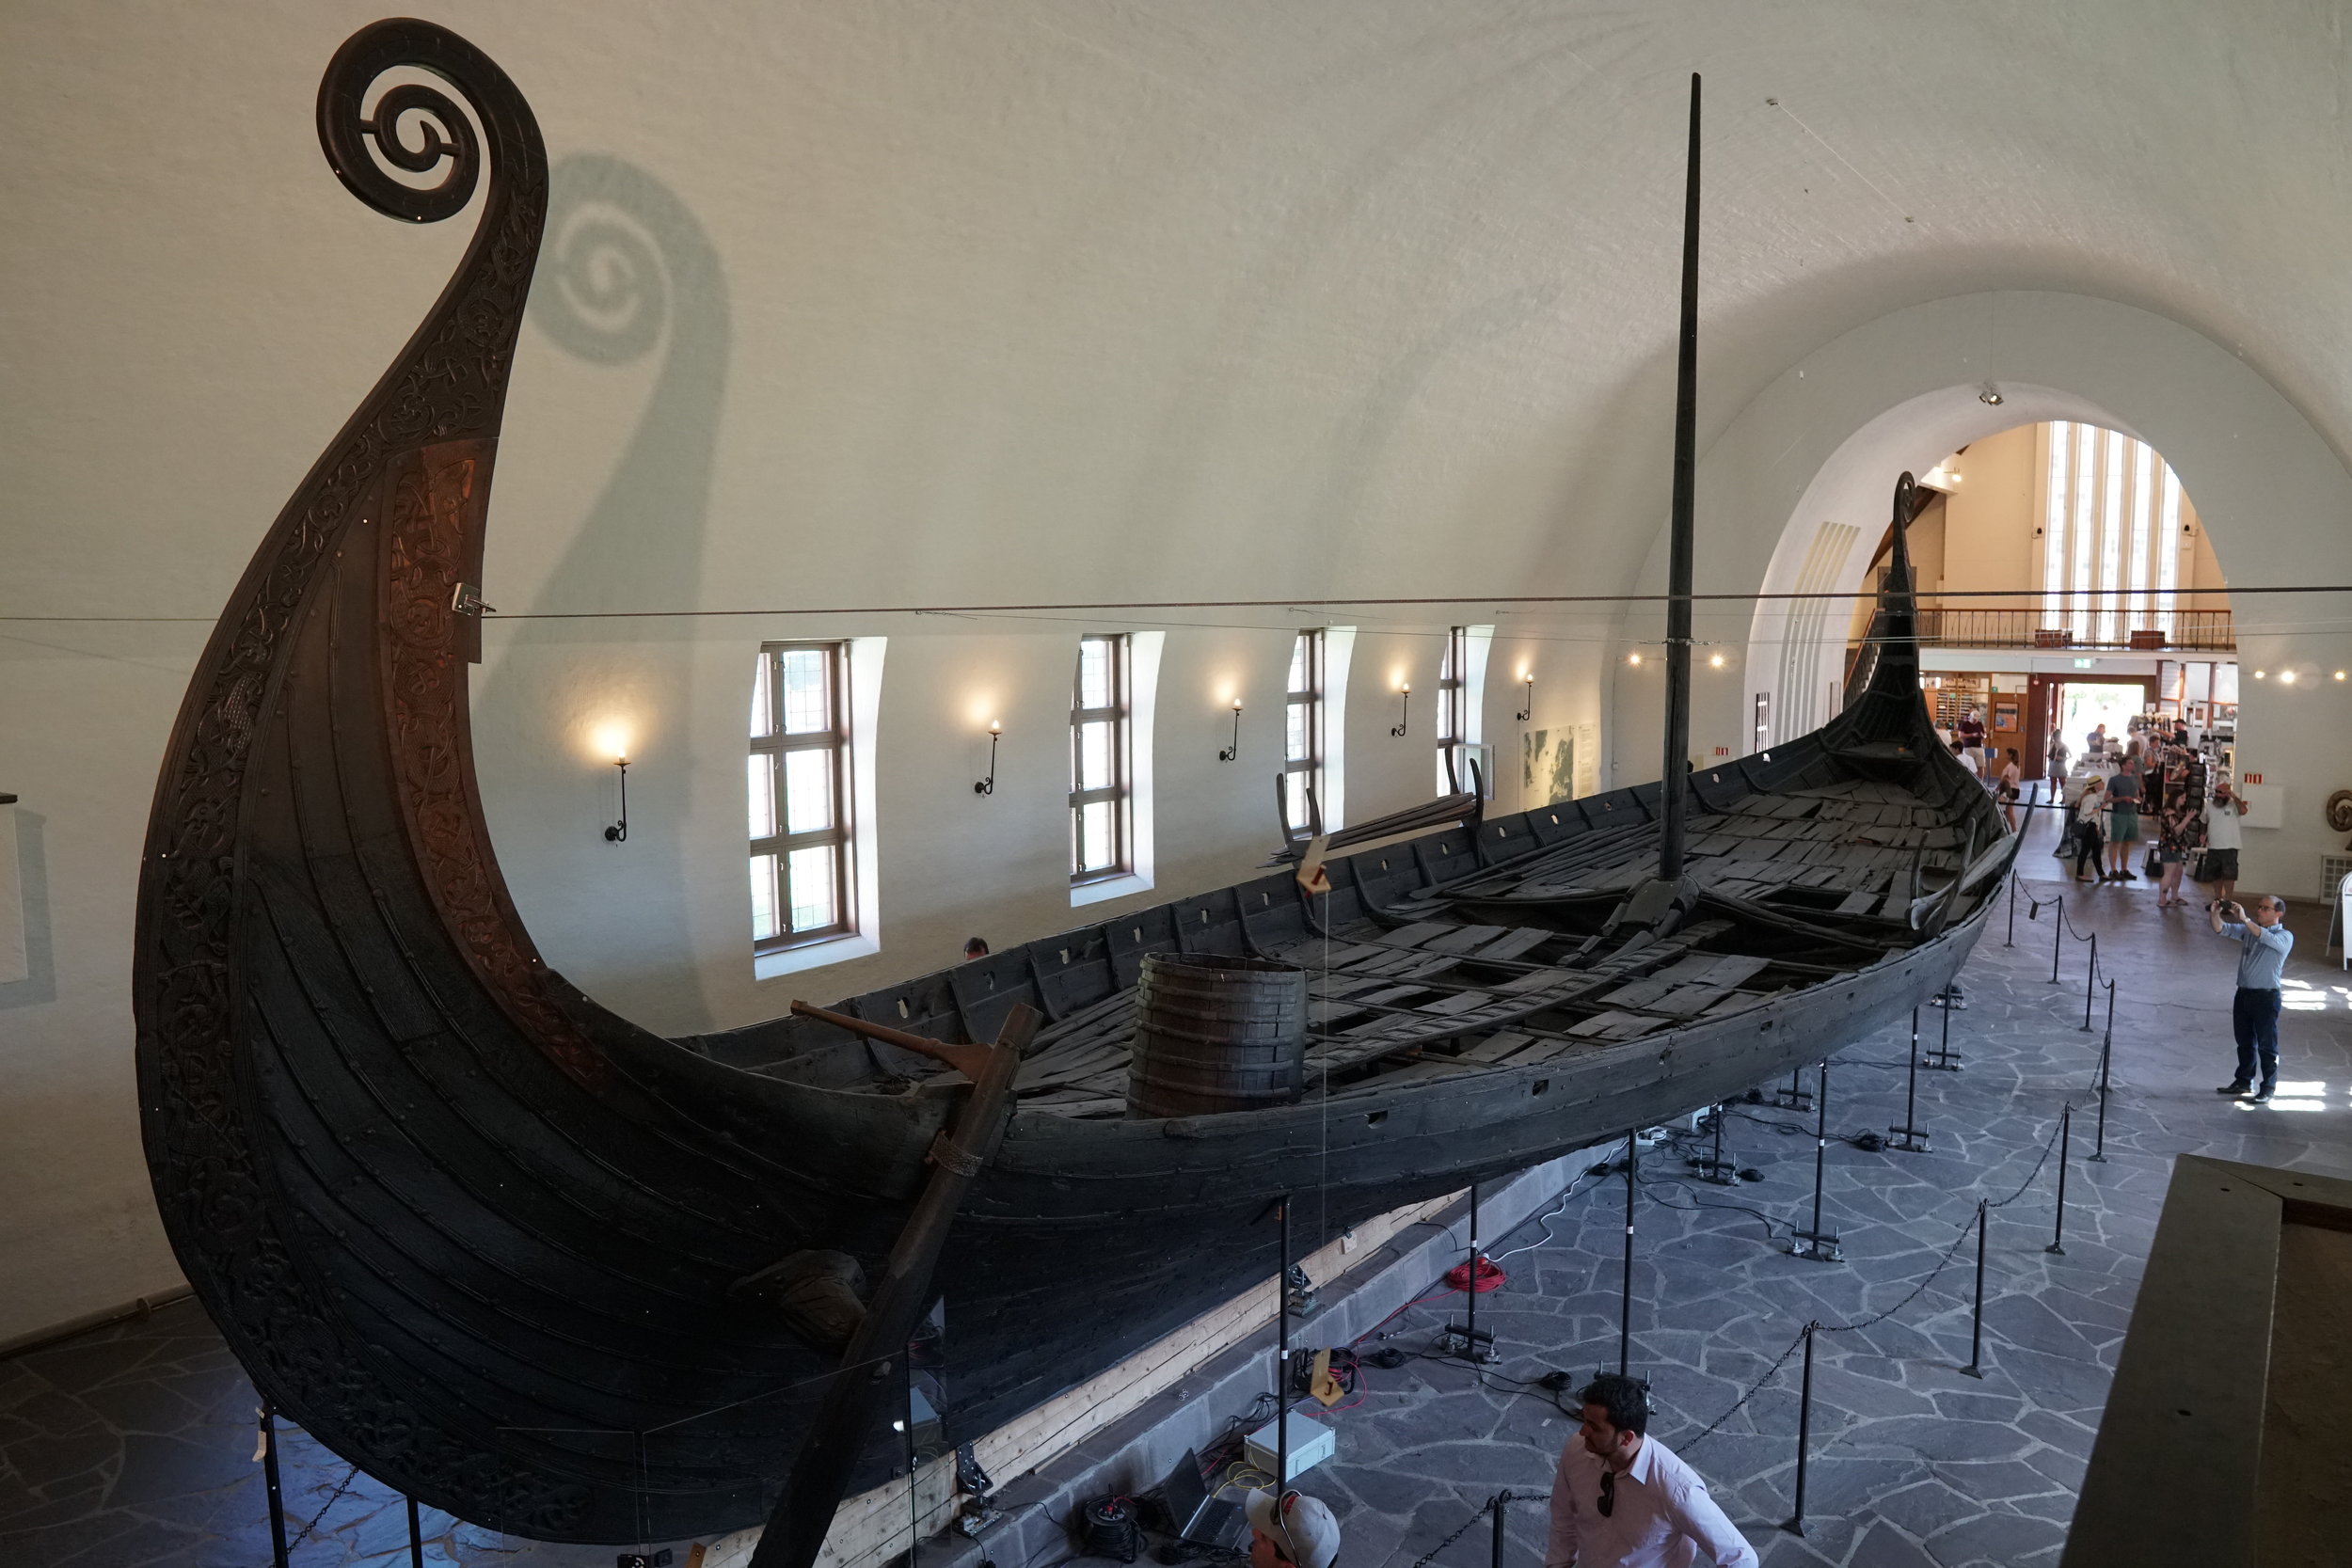  Took a visit to the Viking Ship Museum, which houses archaeological finds from three viking ship burials. One ship is the largest known ship burial in the world. 